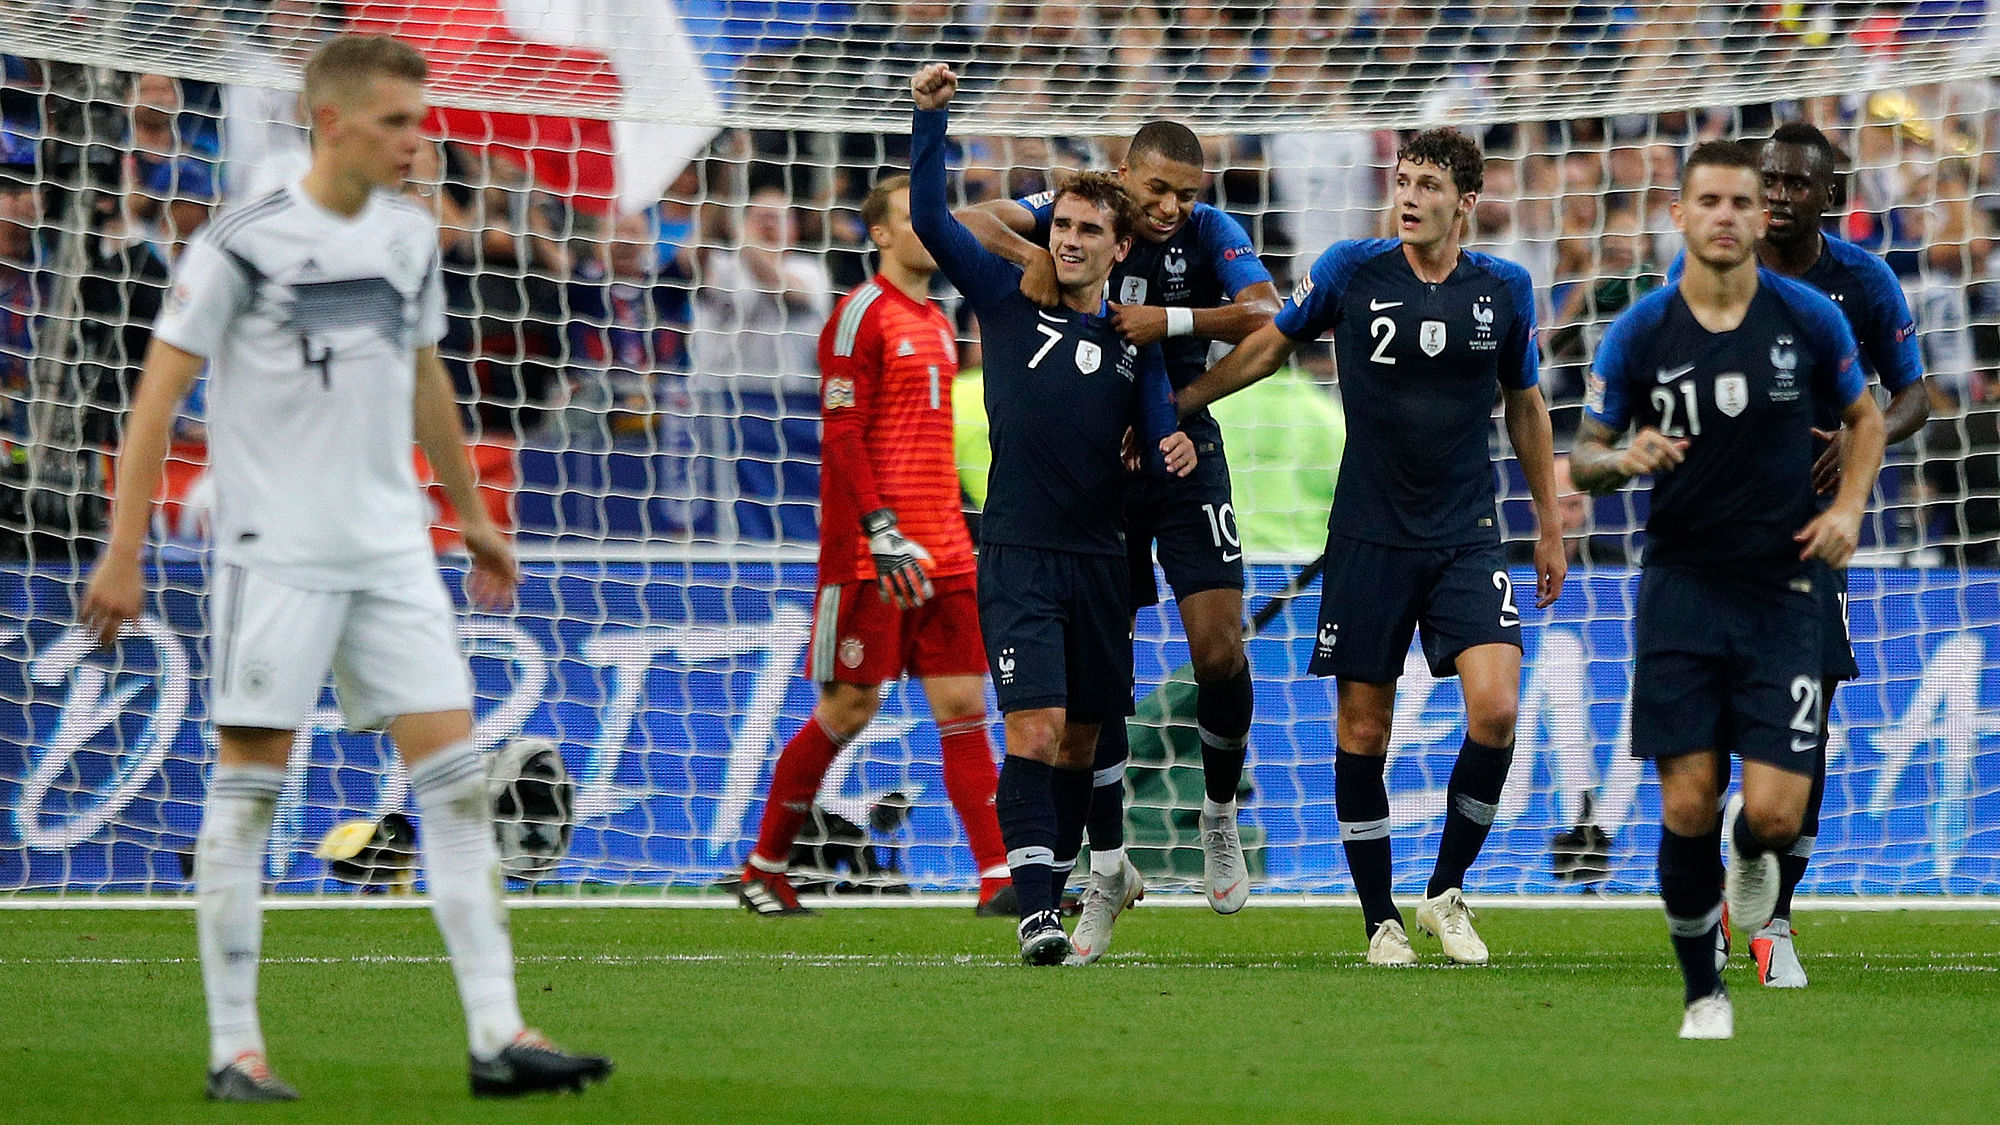 France’s Antoine Griezmann, center, clenches his fist after scoring his second goal during their UEFA Nations League soccer match between France and Germany.